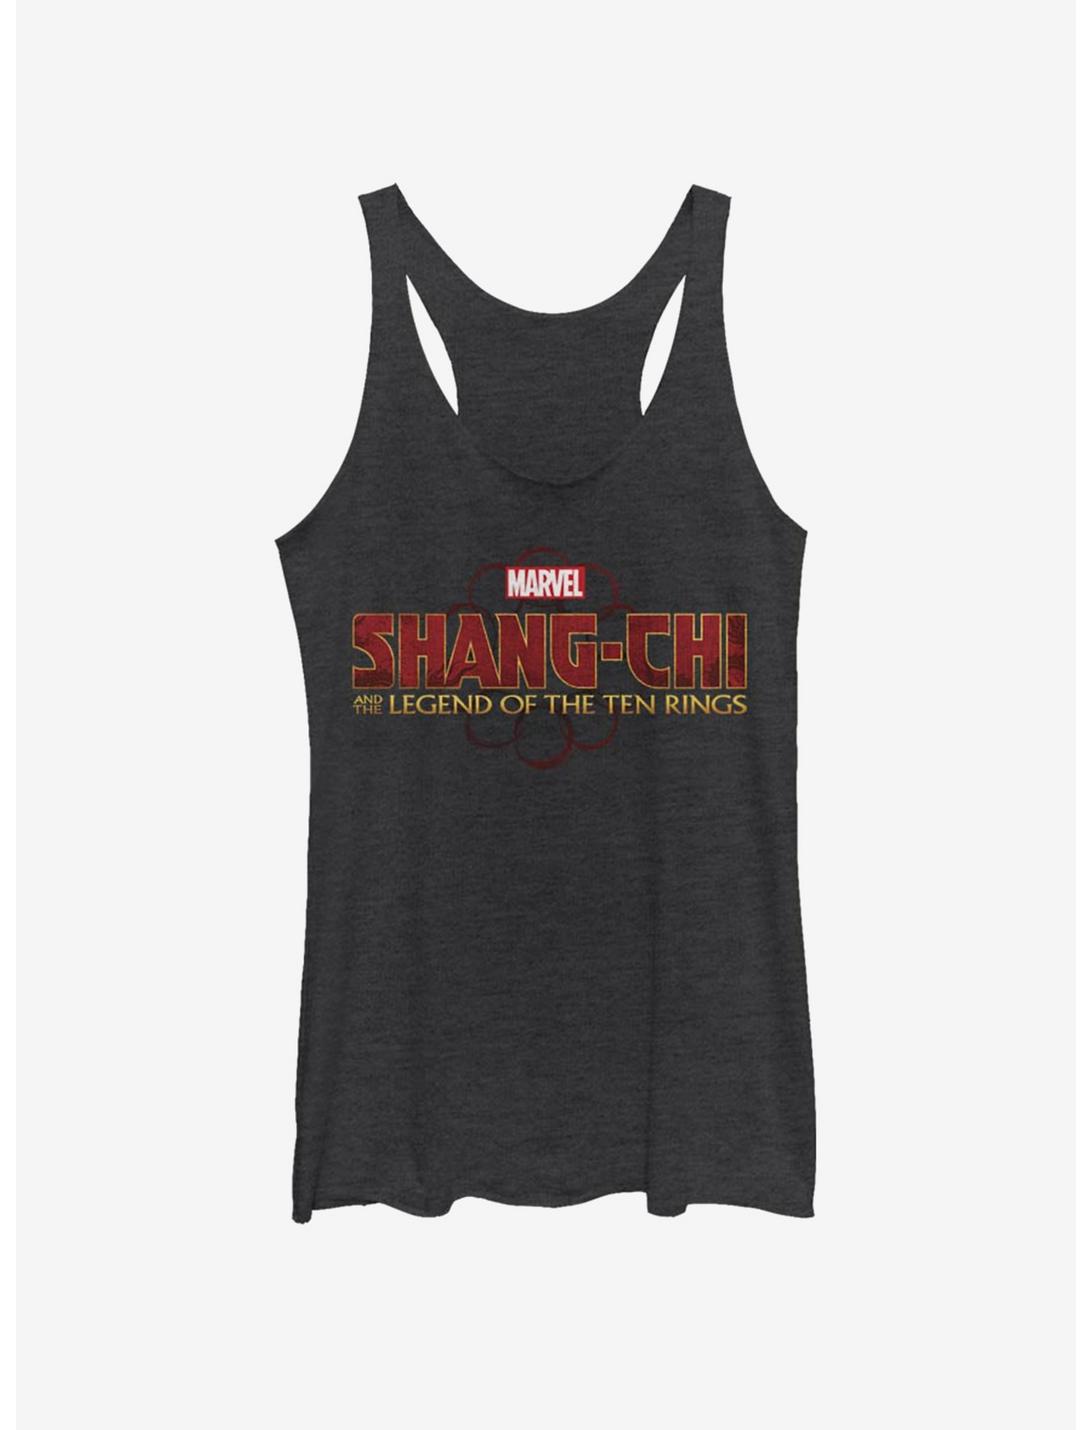 Marvel Shang-Chi And The Legend Of The Ten Rings Girls Tank, BLK HTR, hi-res